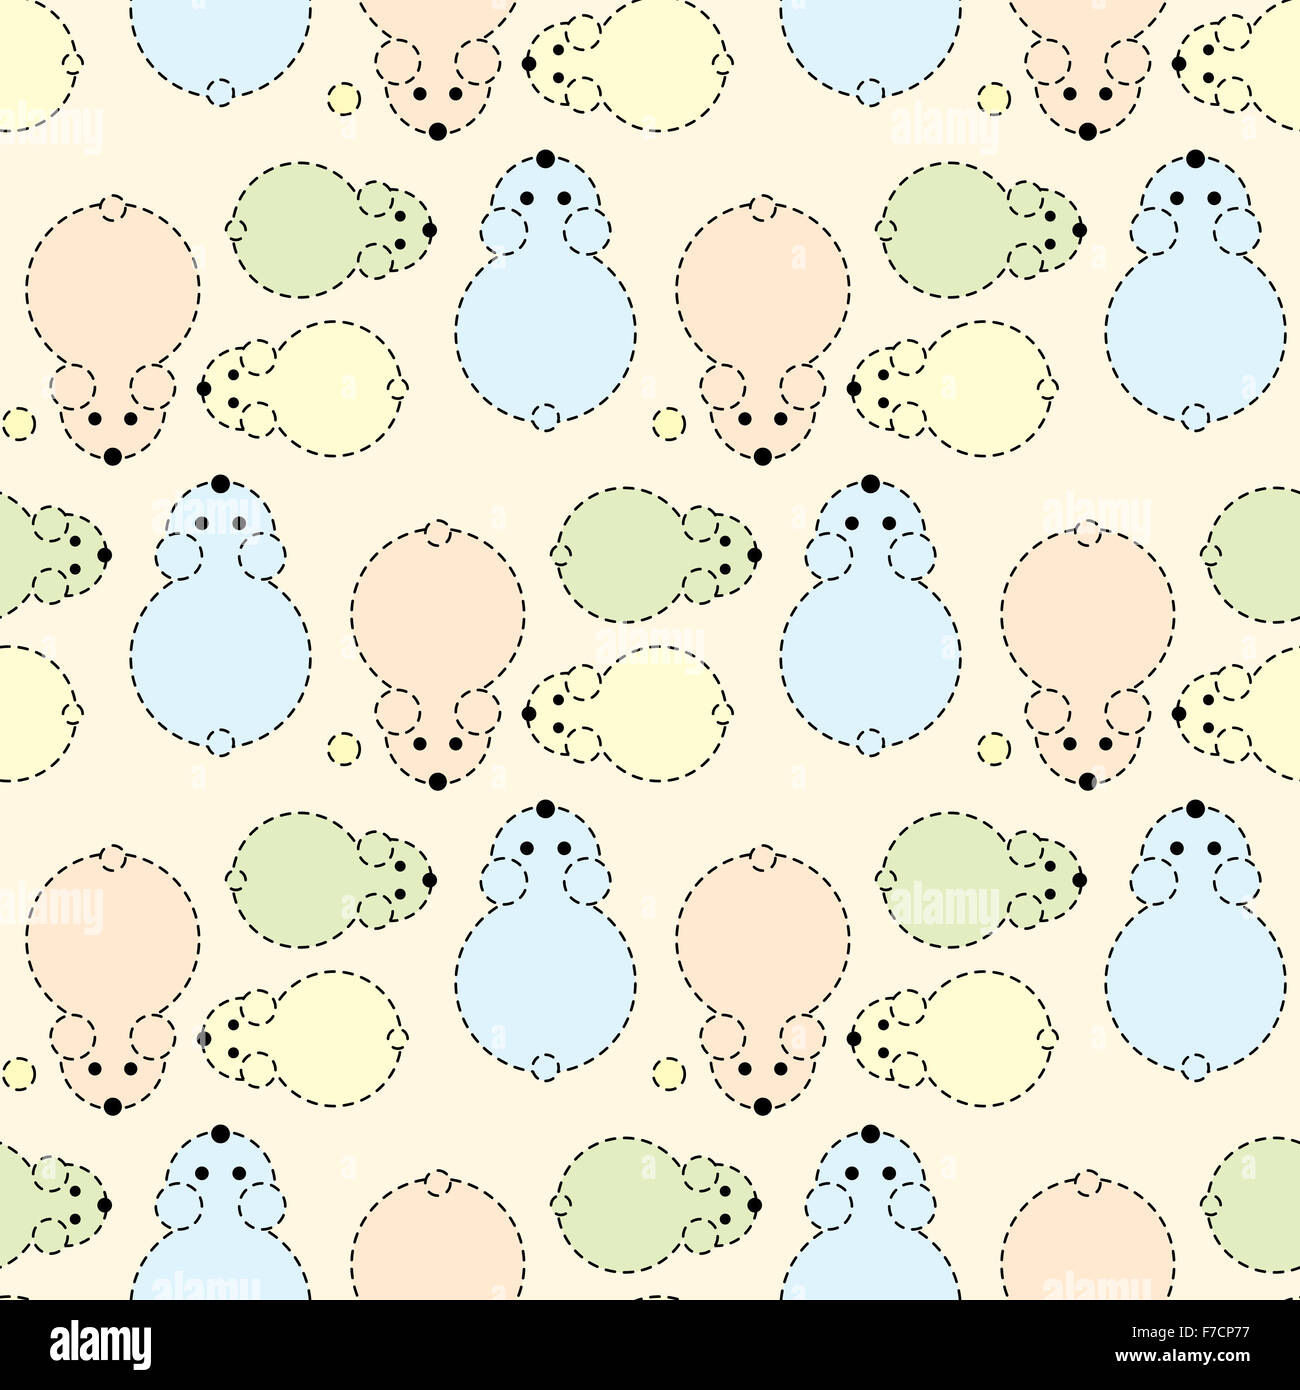 Seamless pattern, funny bears, top view Stock Photo